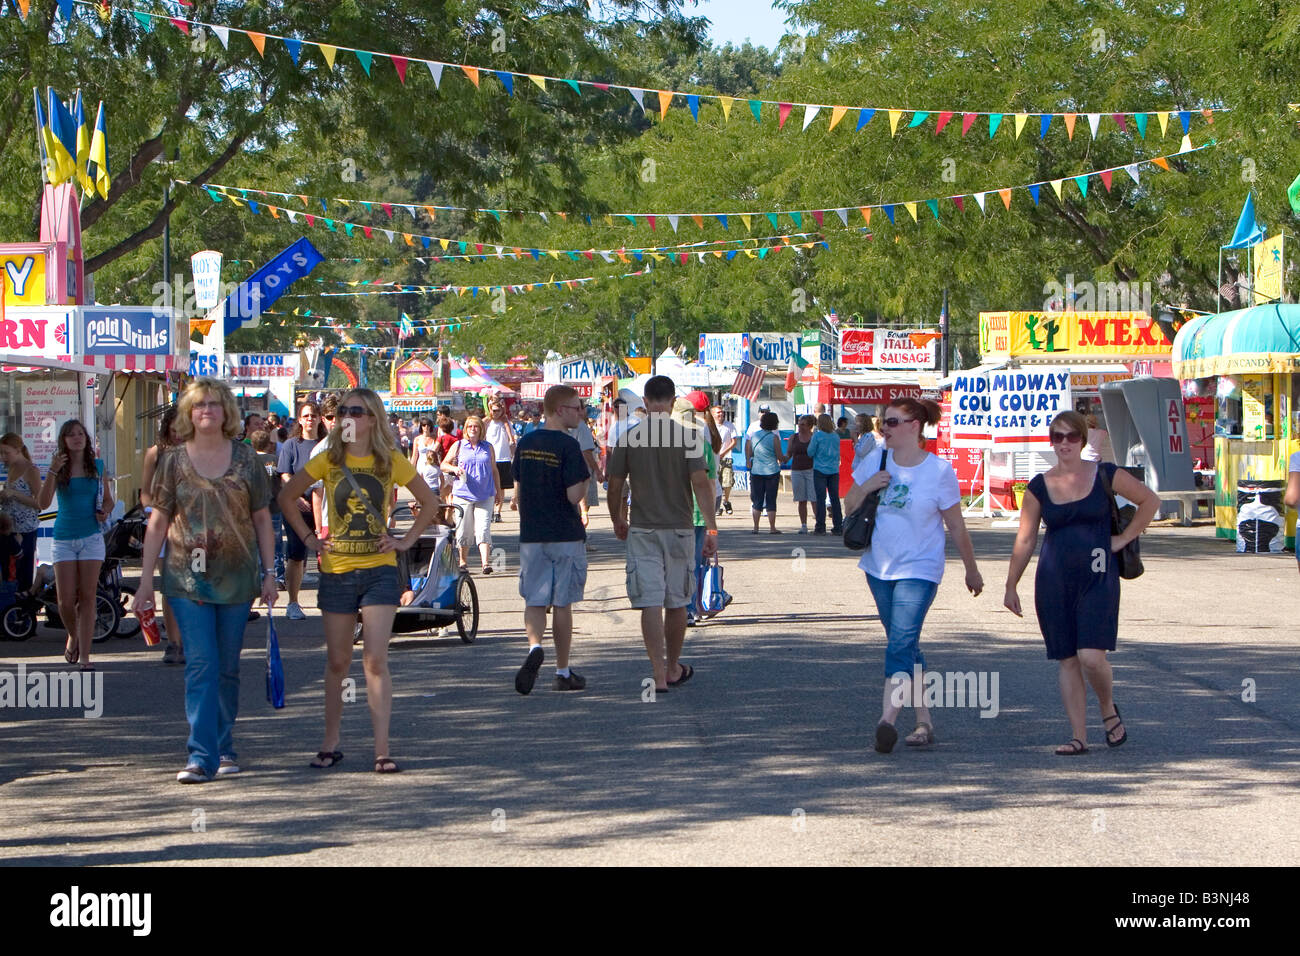 People walk amongst food stands at the Western Idaho Fair in Boise Idaho Stock Photo